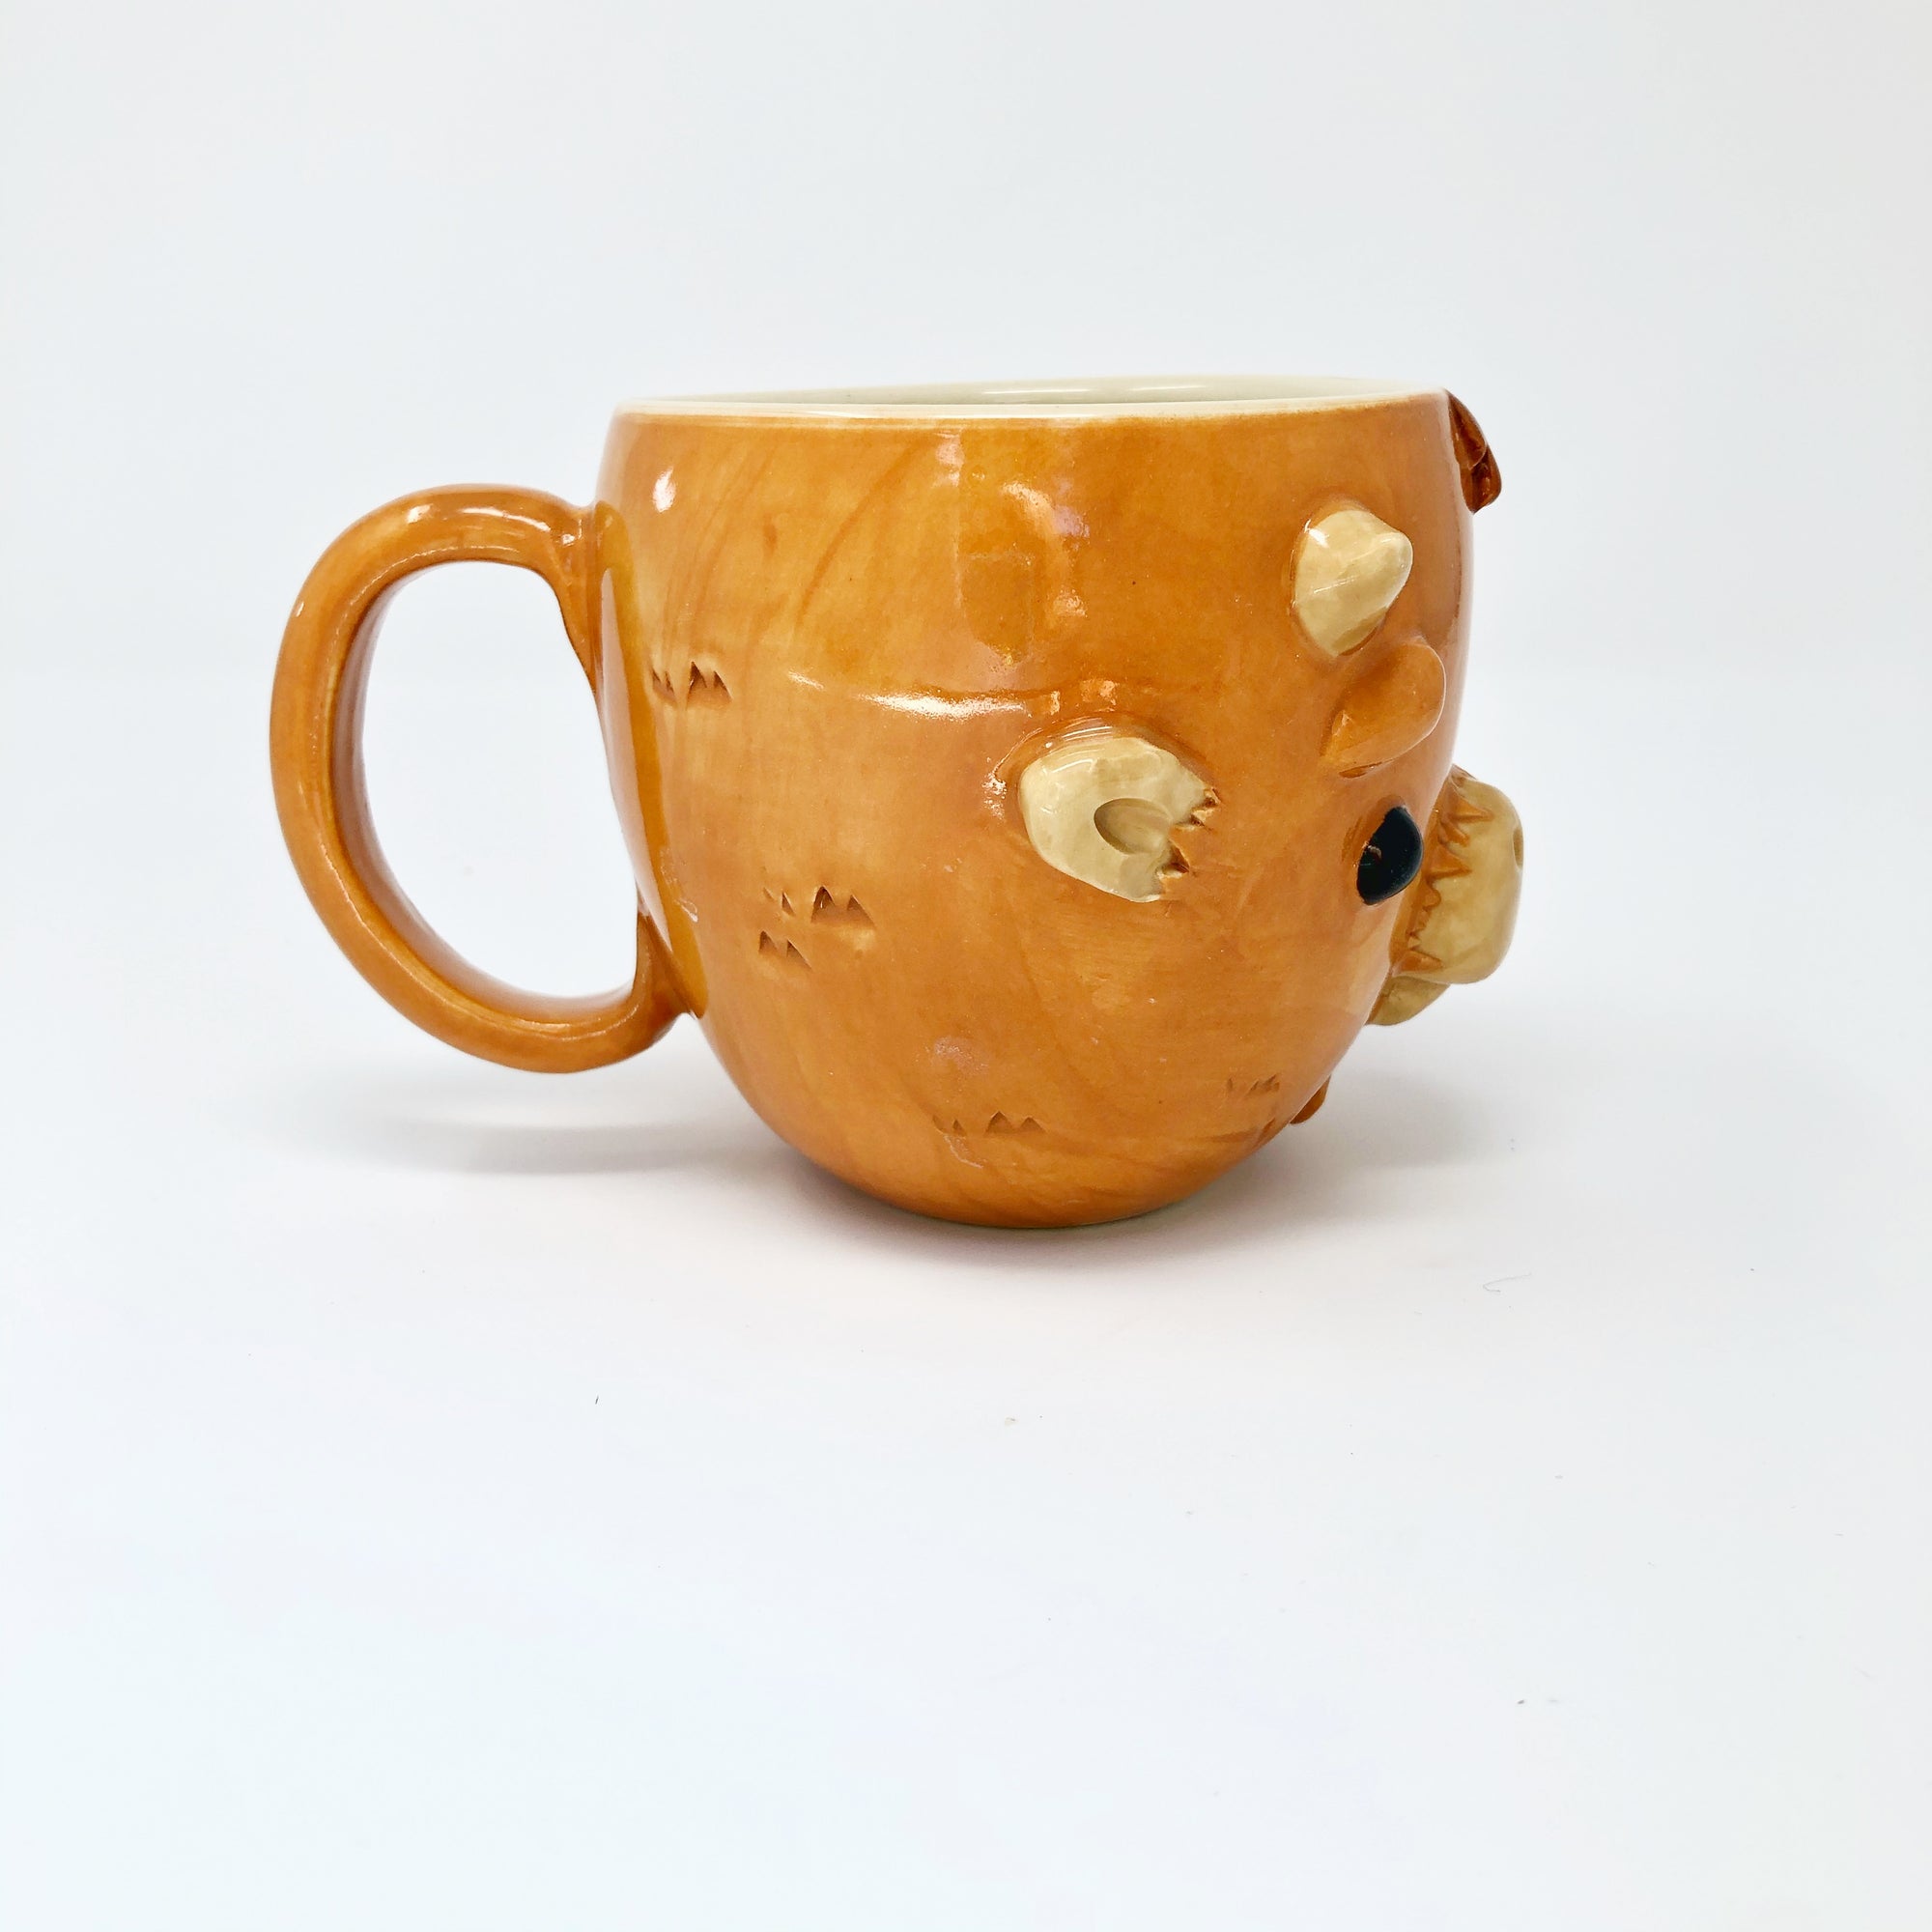 Cow With Long Hair Over Its Face Coffee Mug by John Short - Pixels